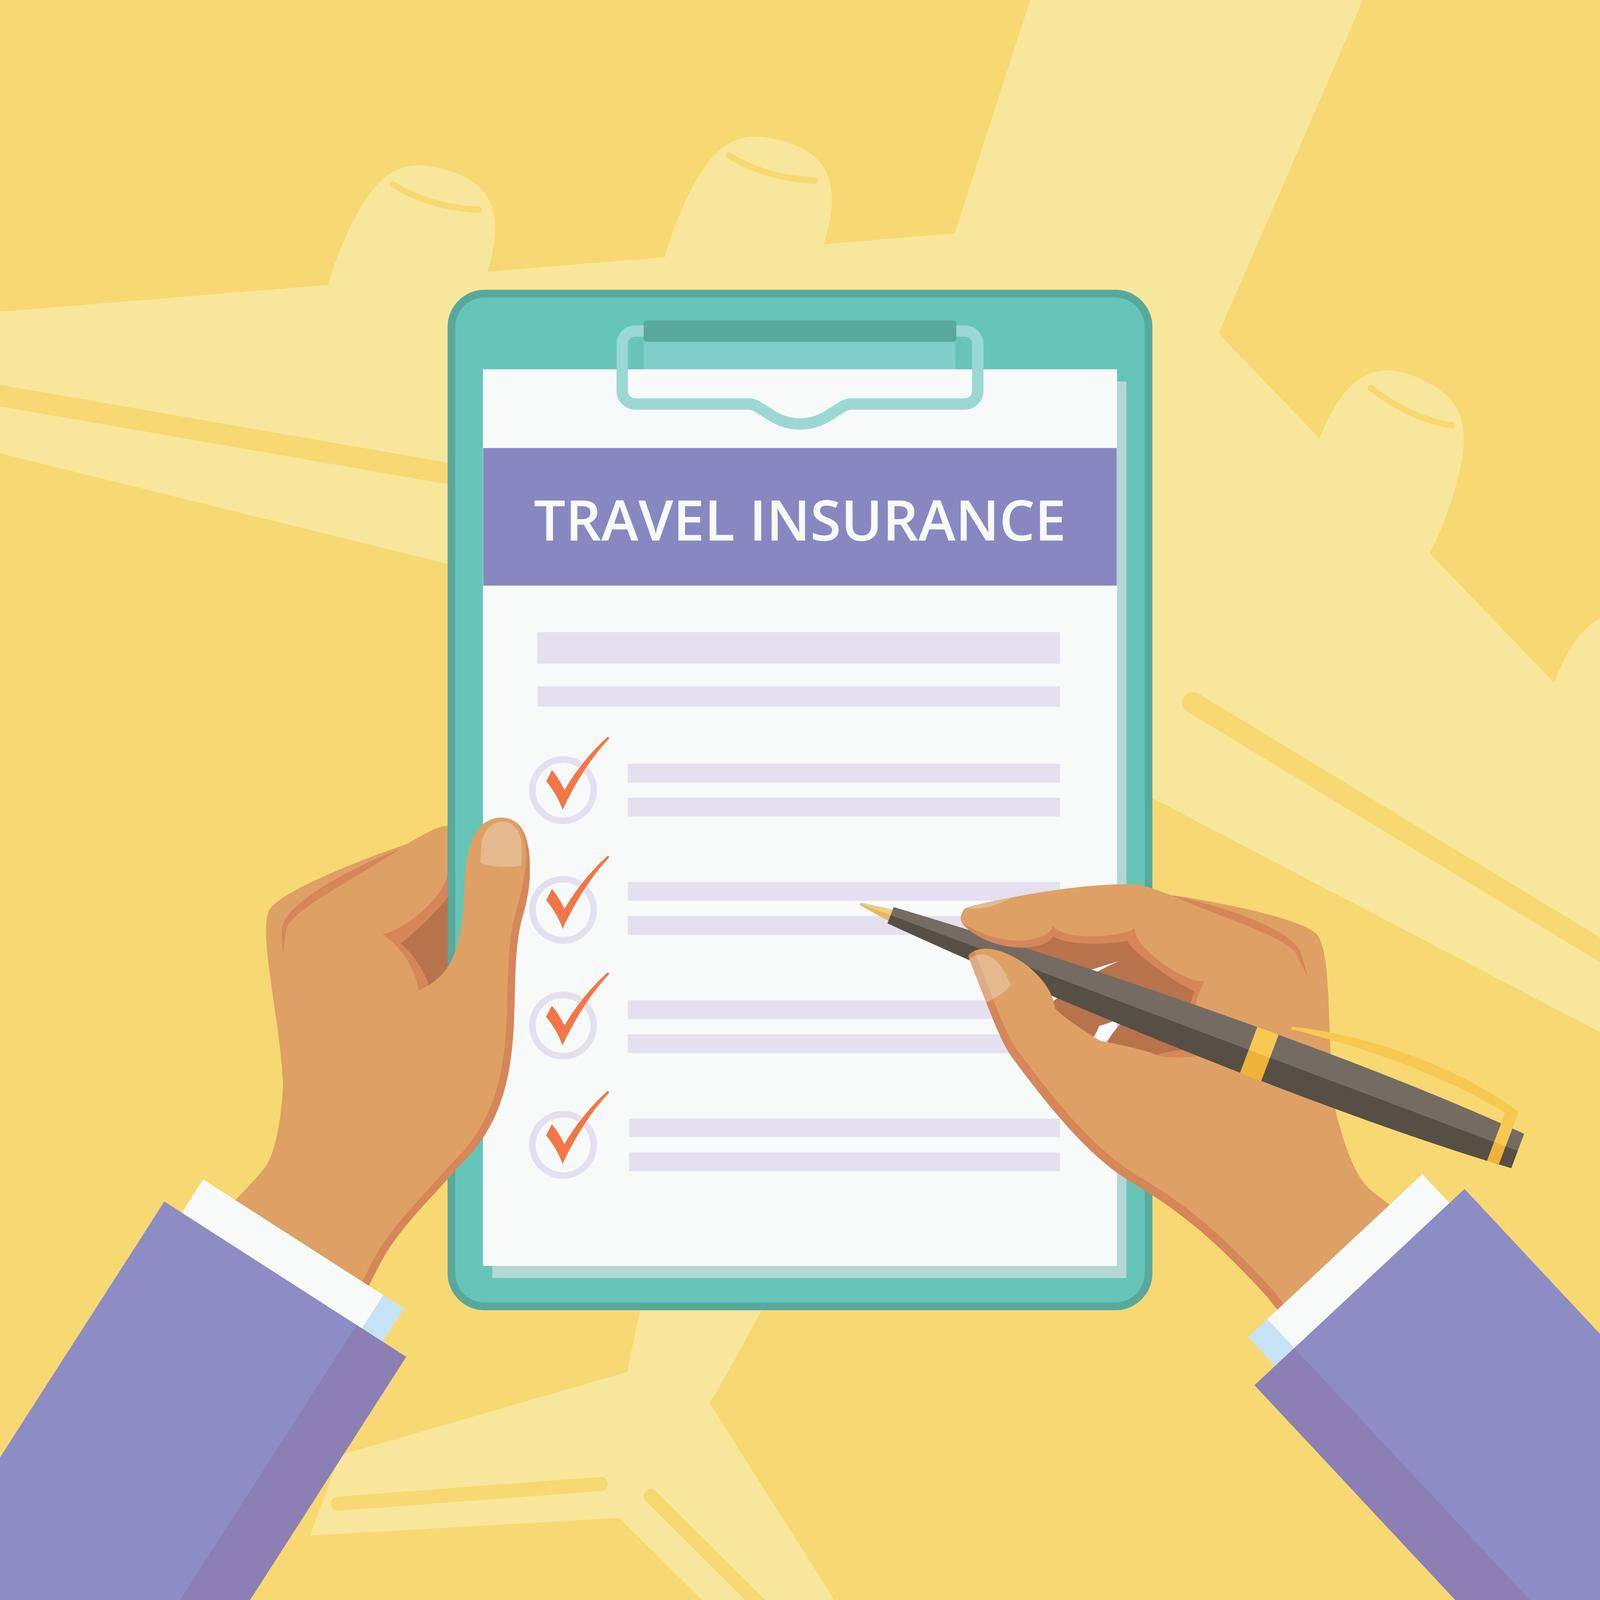 Travel insurance policy with hands and clipboard by moonnoon